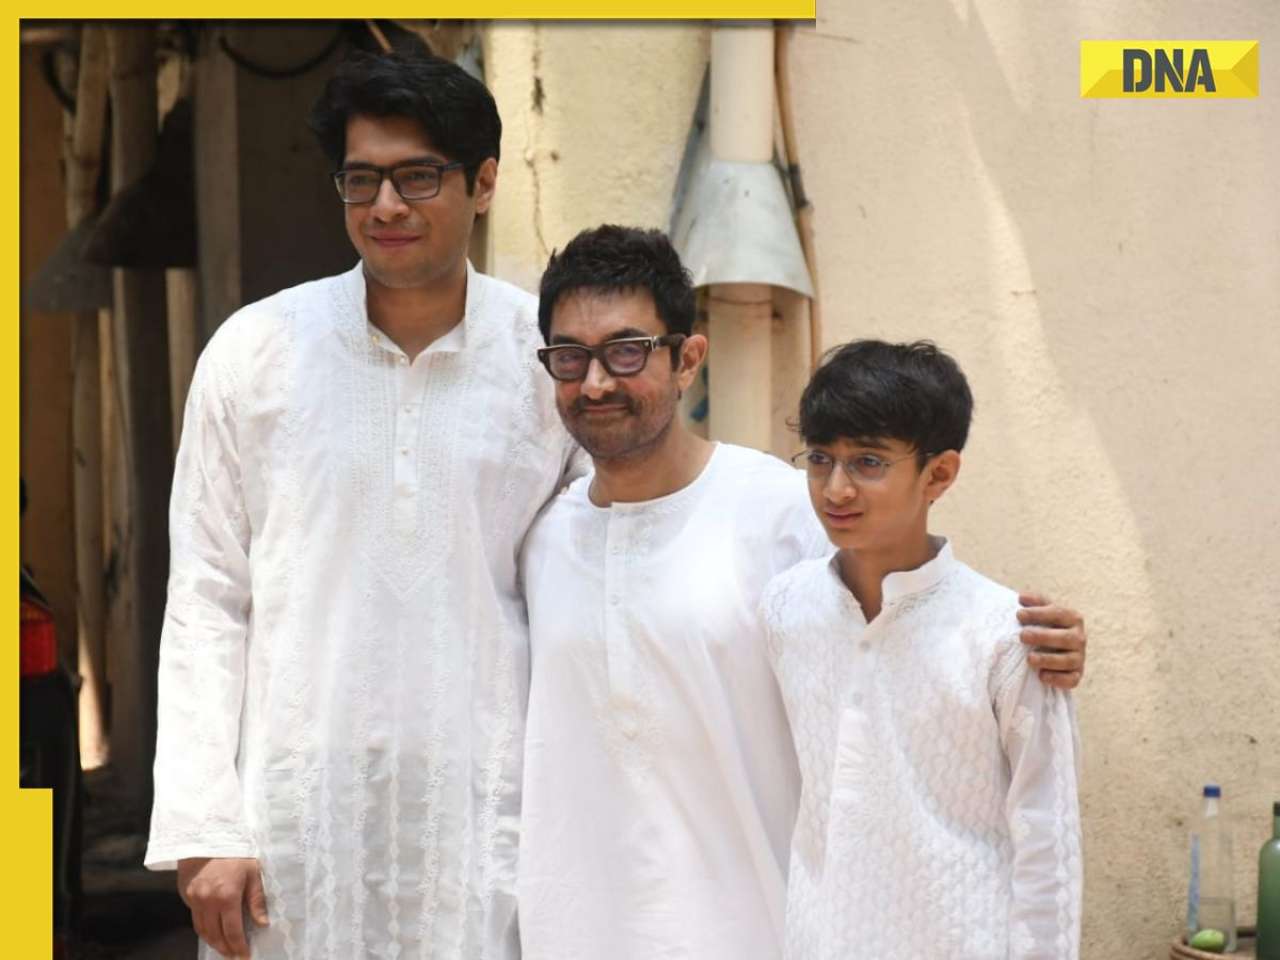 Watch: Aamir Khan celebrates Eid with paps, distributes sweets with sons Junaid, Azad; netizens praise their simplicity